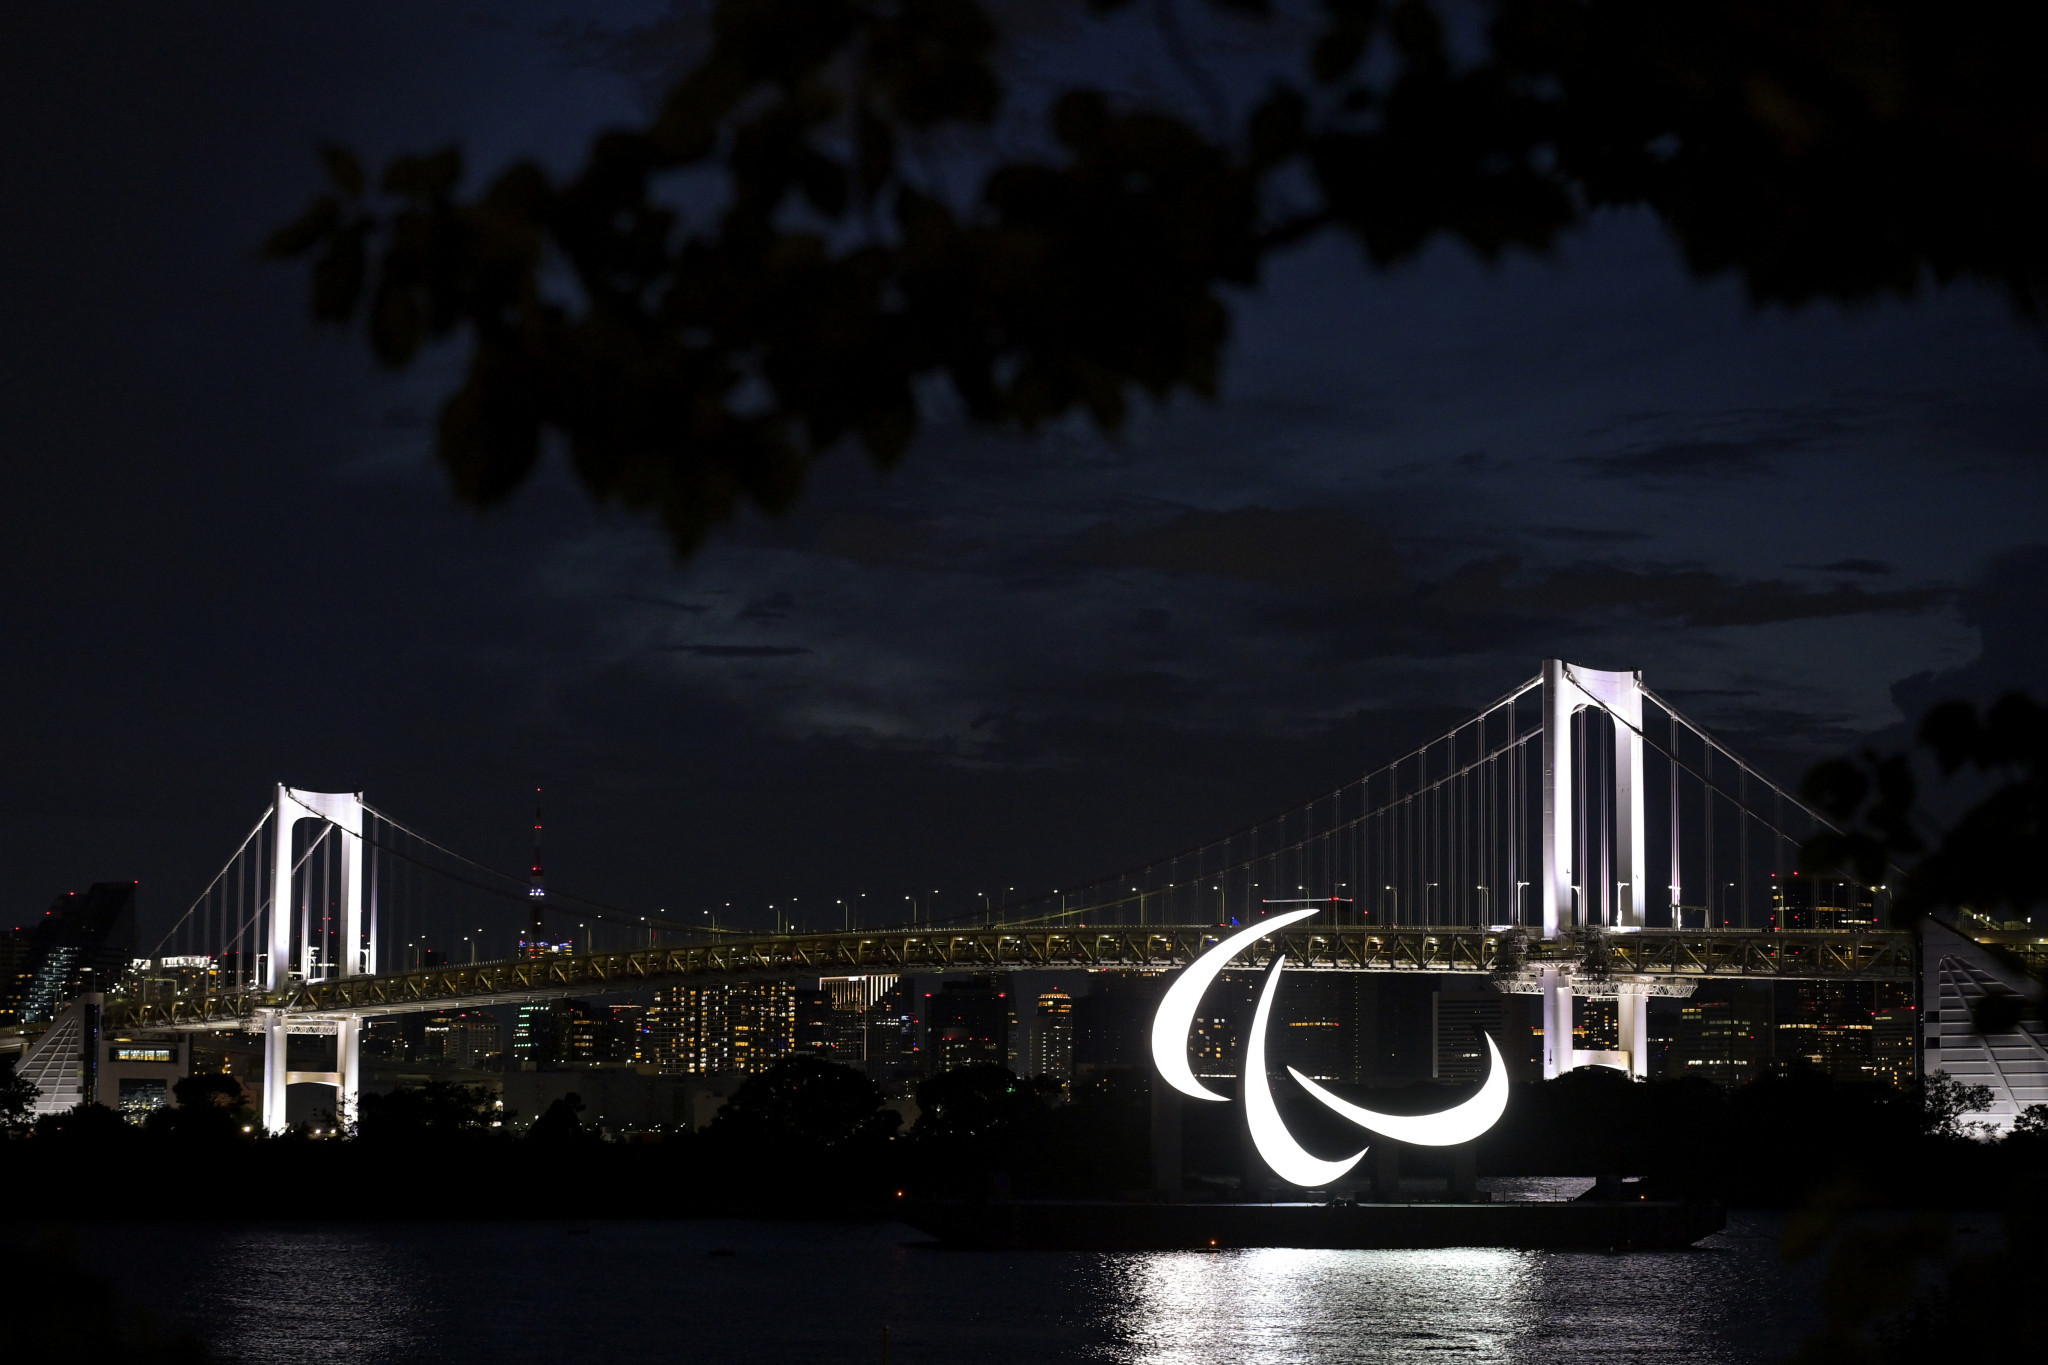 The logo was illuminated at night during the Paralympic Games, which concluded yesterday ©Getty Images